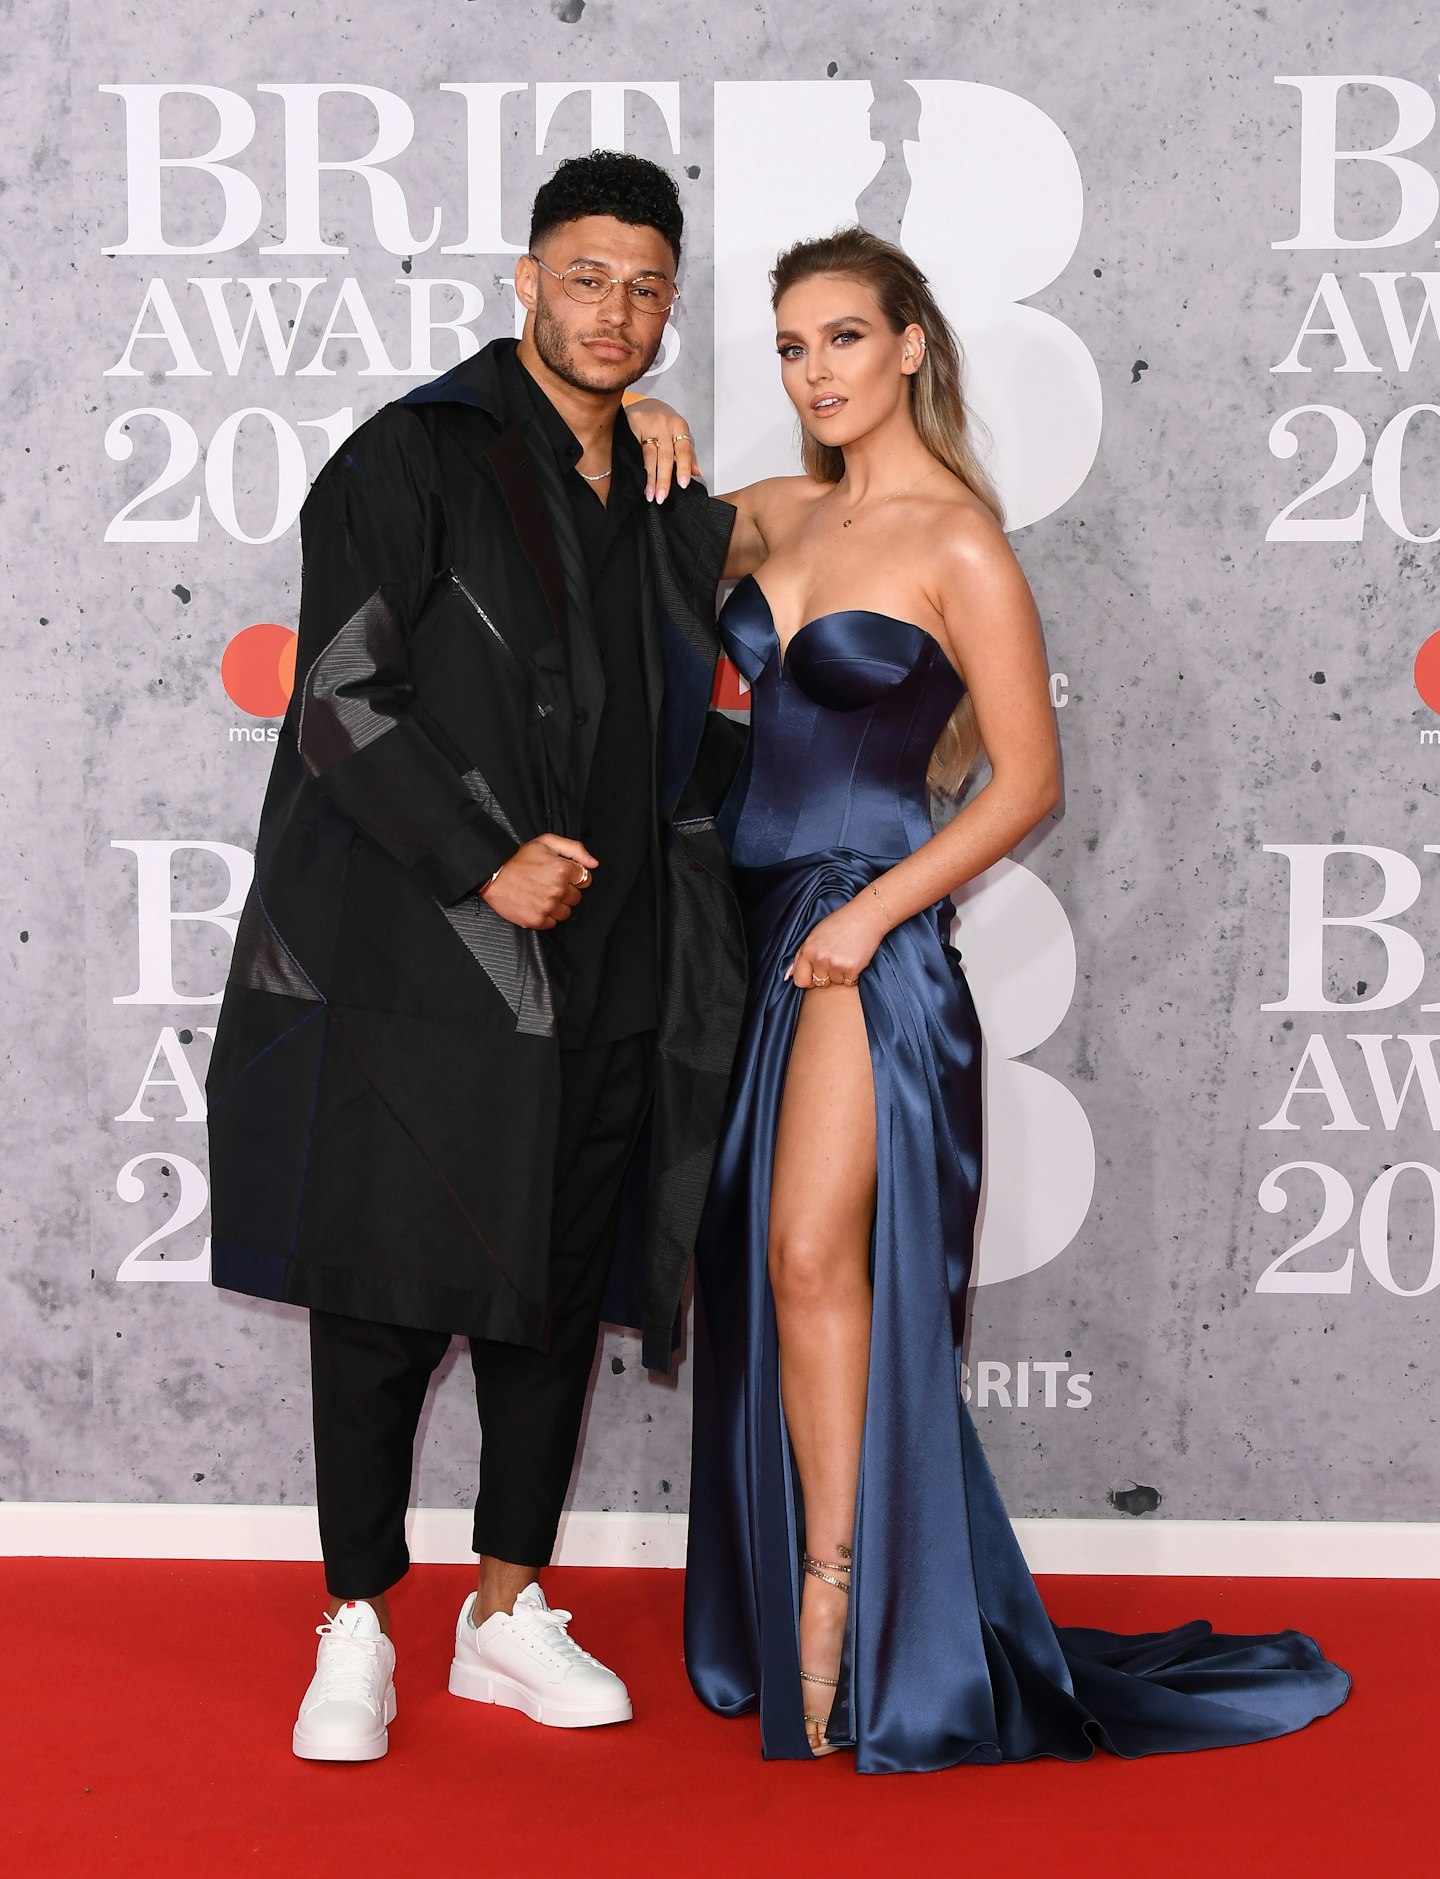 Perrie Edwards and her boyfriend Oxlade-Chamberlain